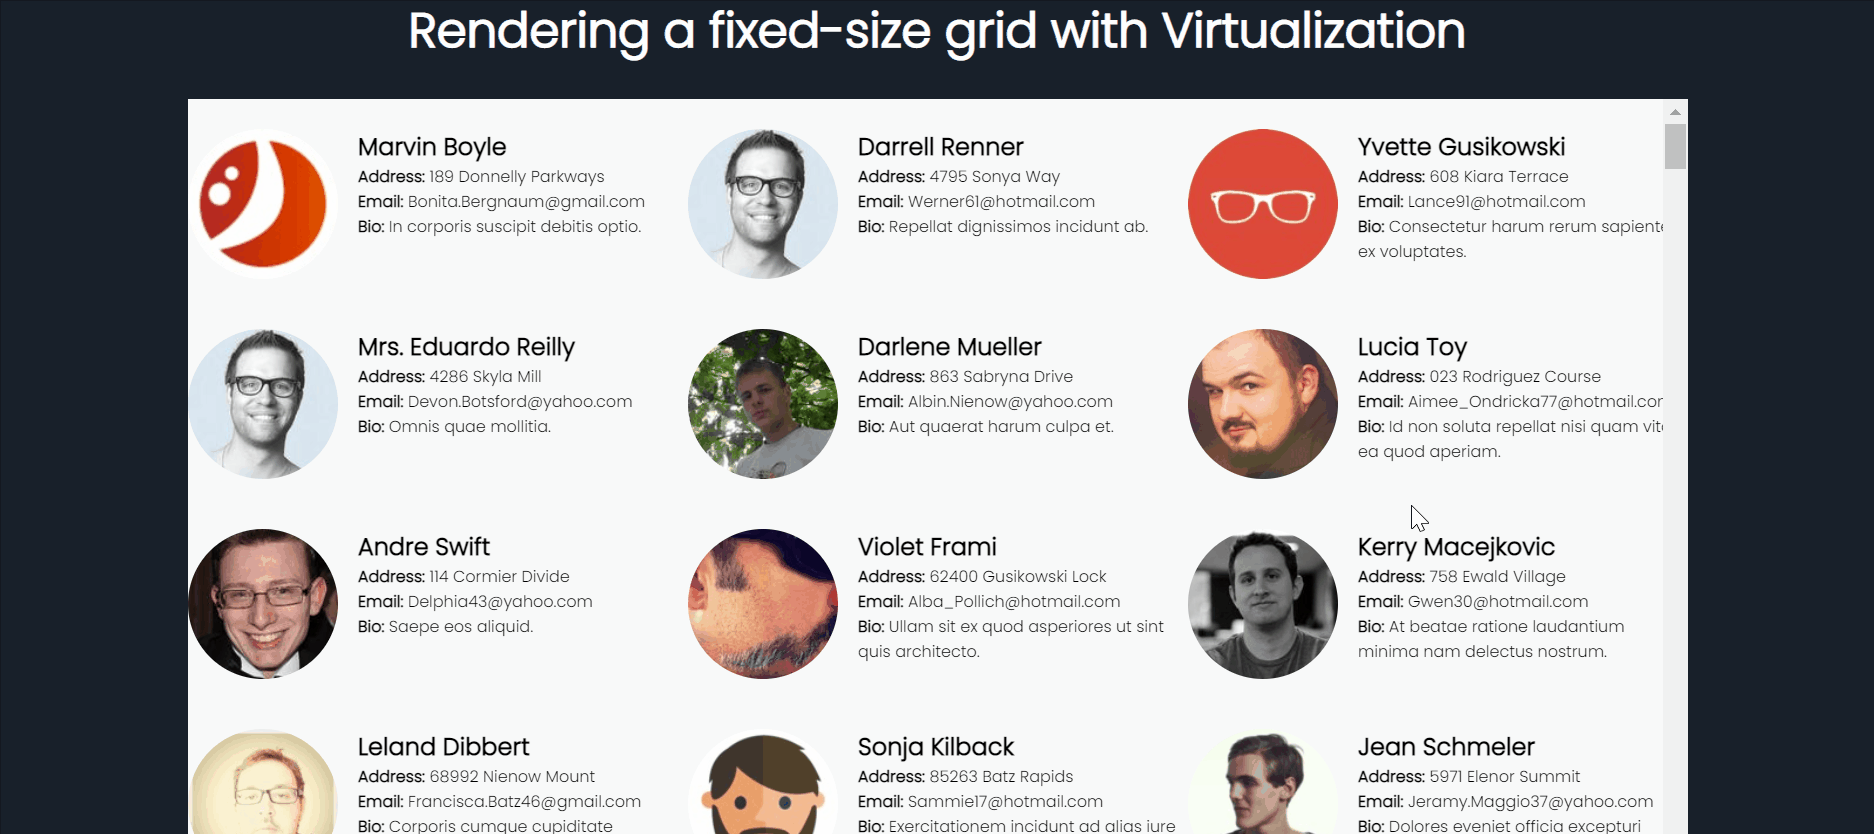 Rendering a fixed-size grid with virtualization